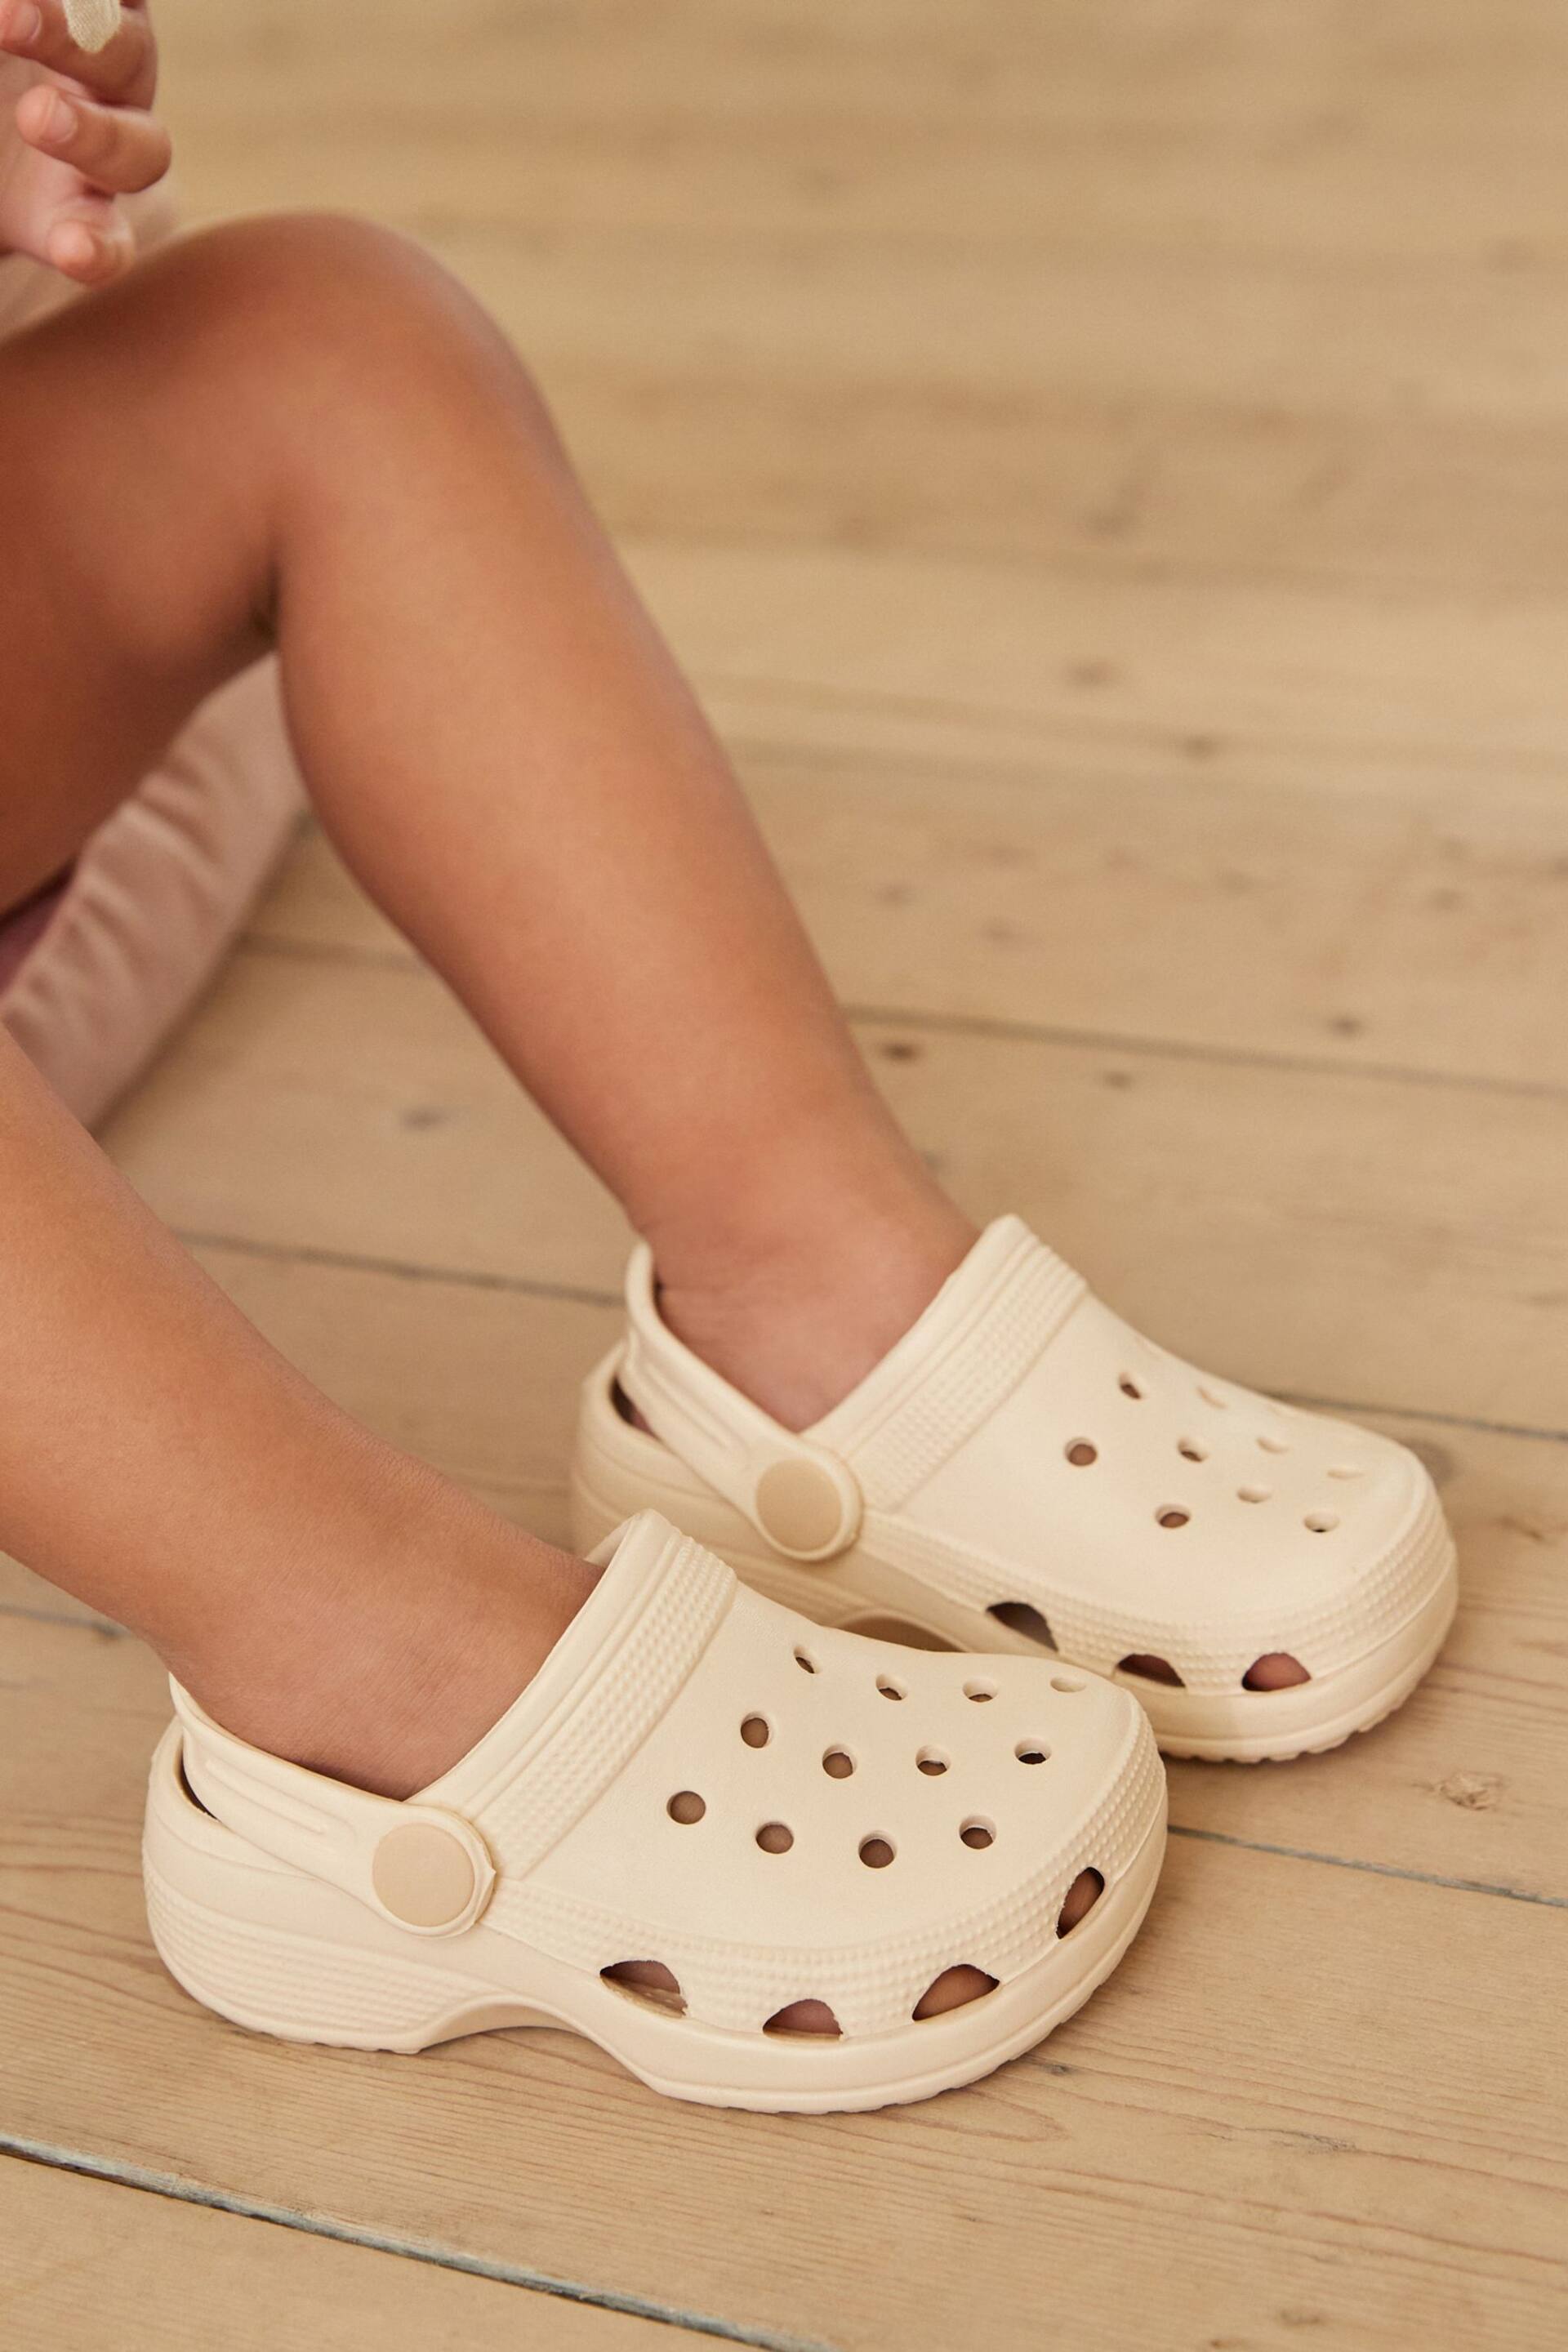 White Neutral Clogs - Image 3 of 3